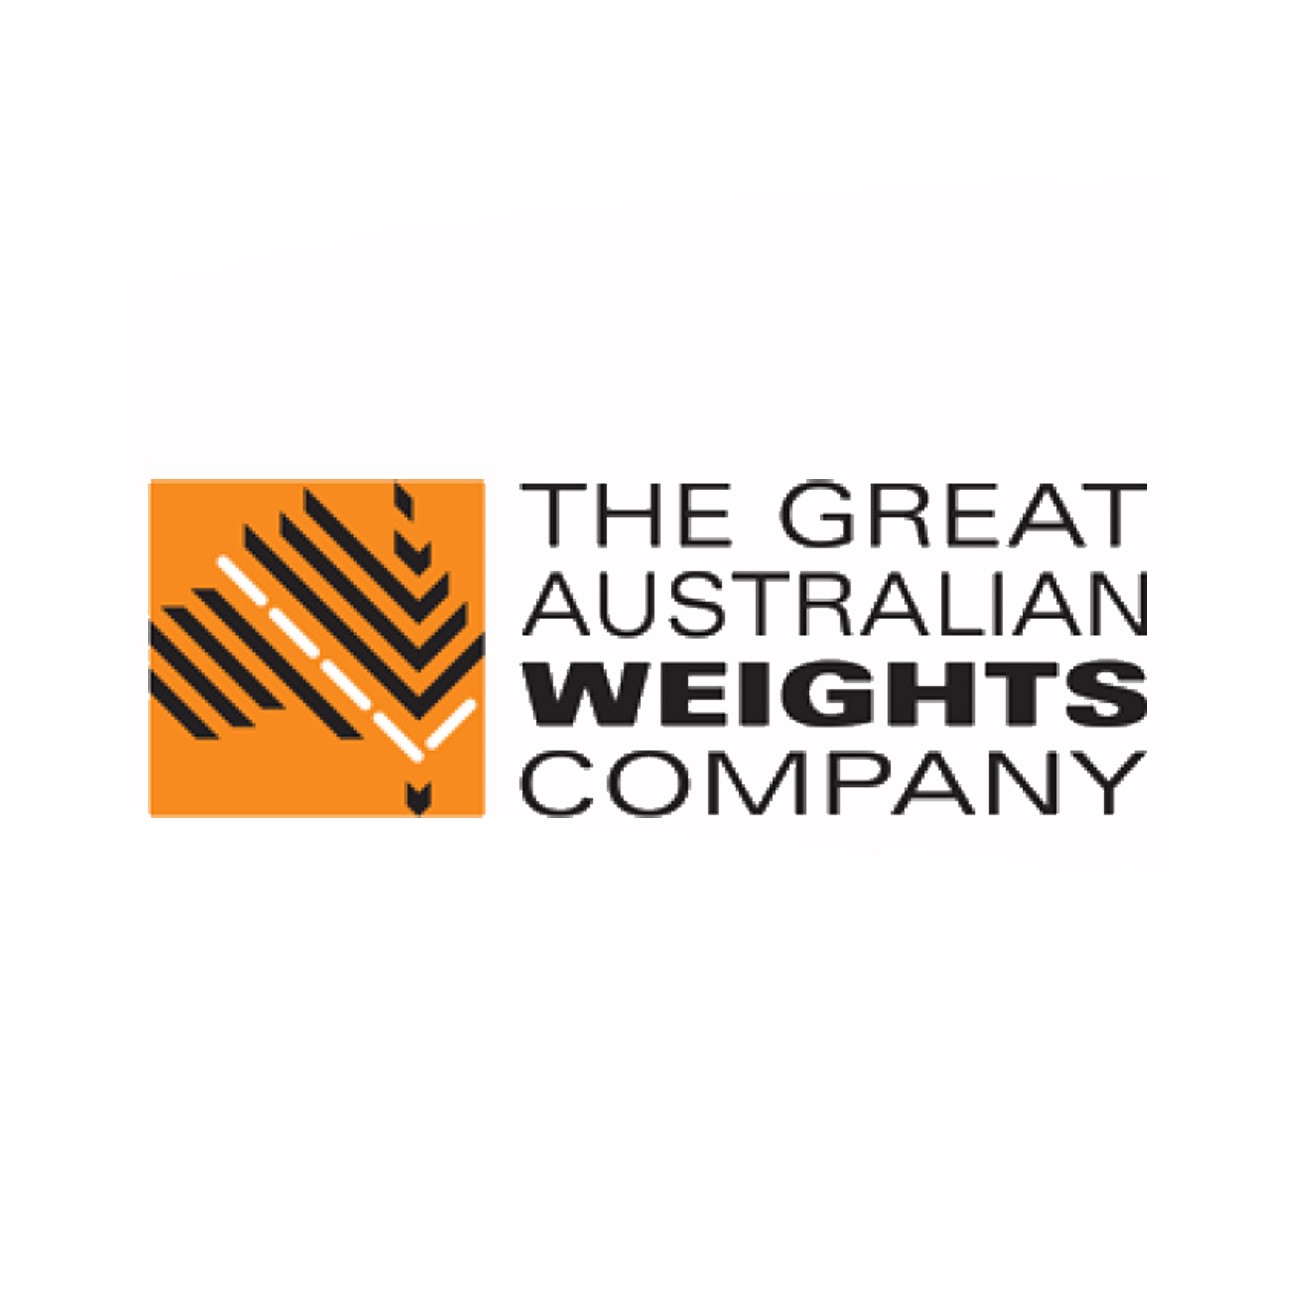 The Great Australian Weights Company